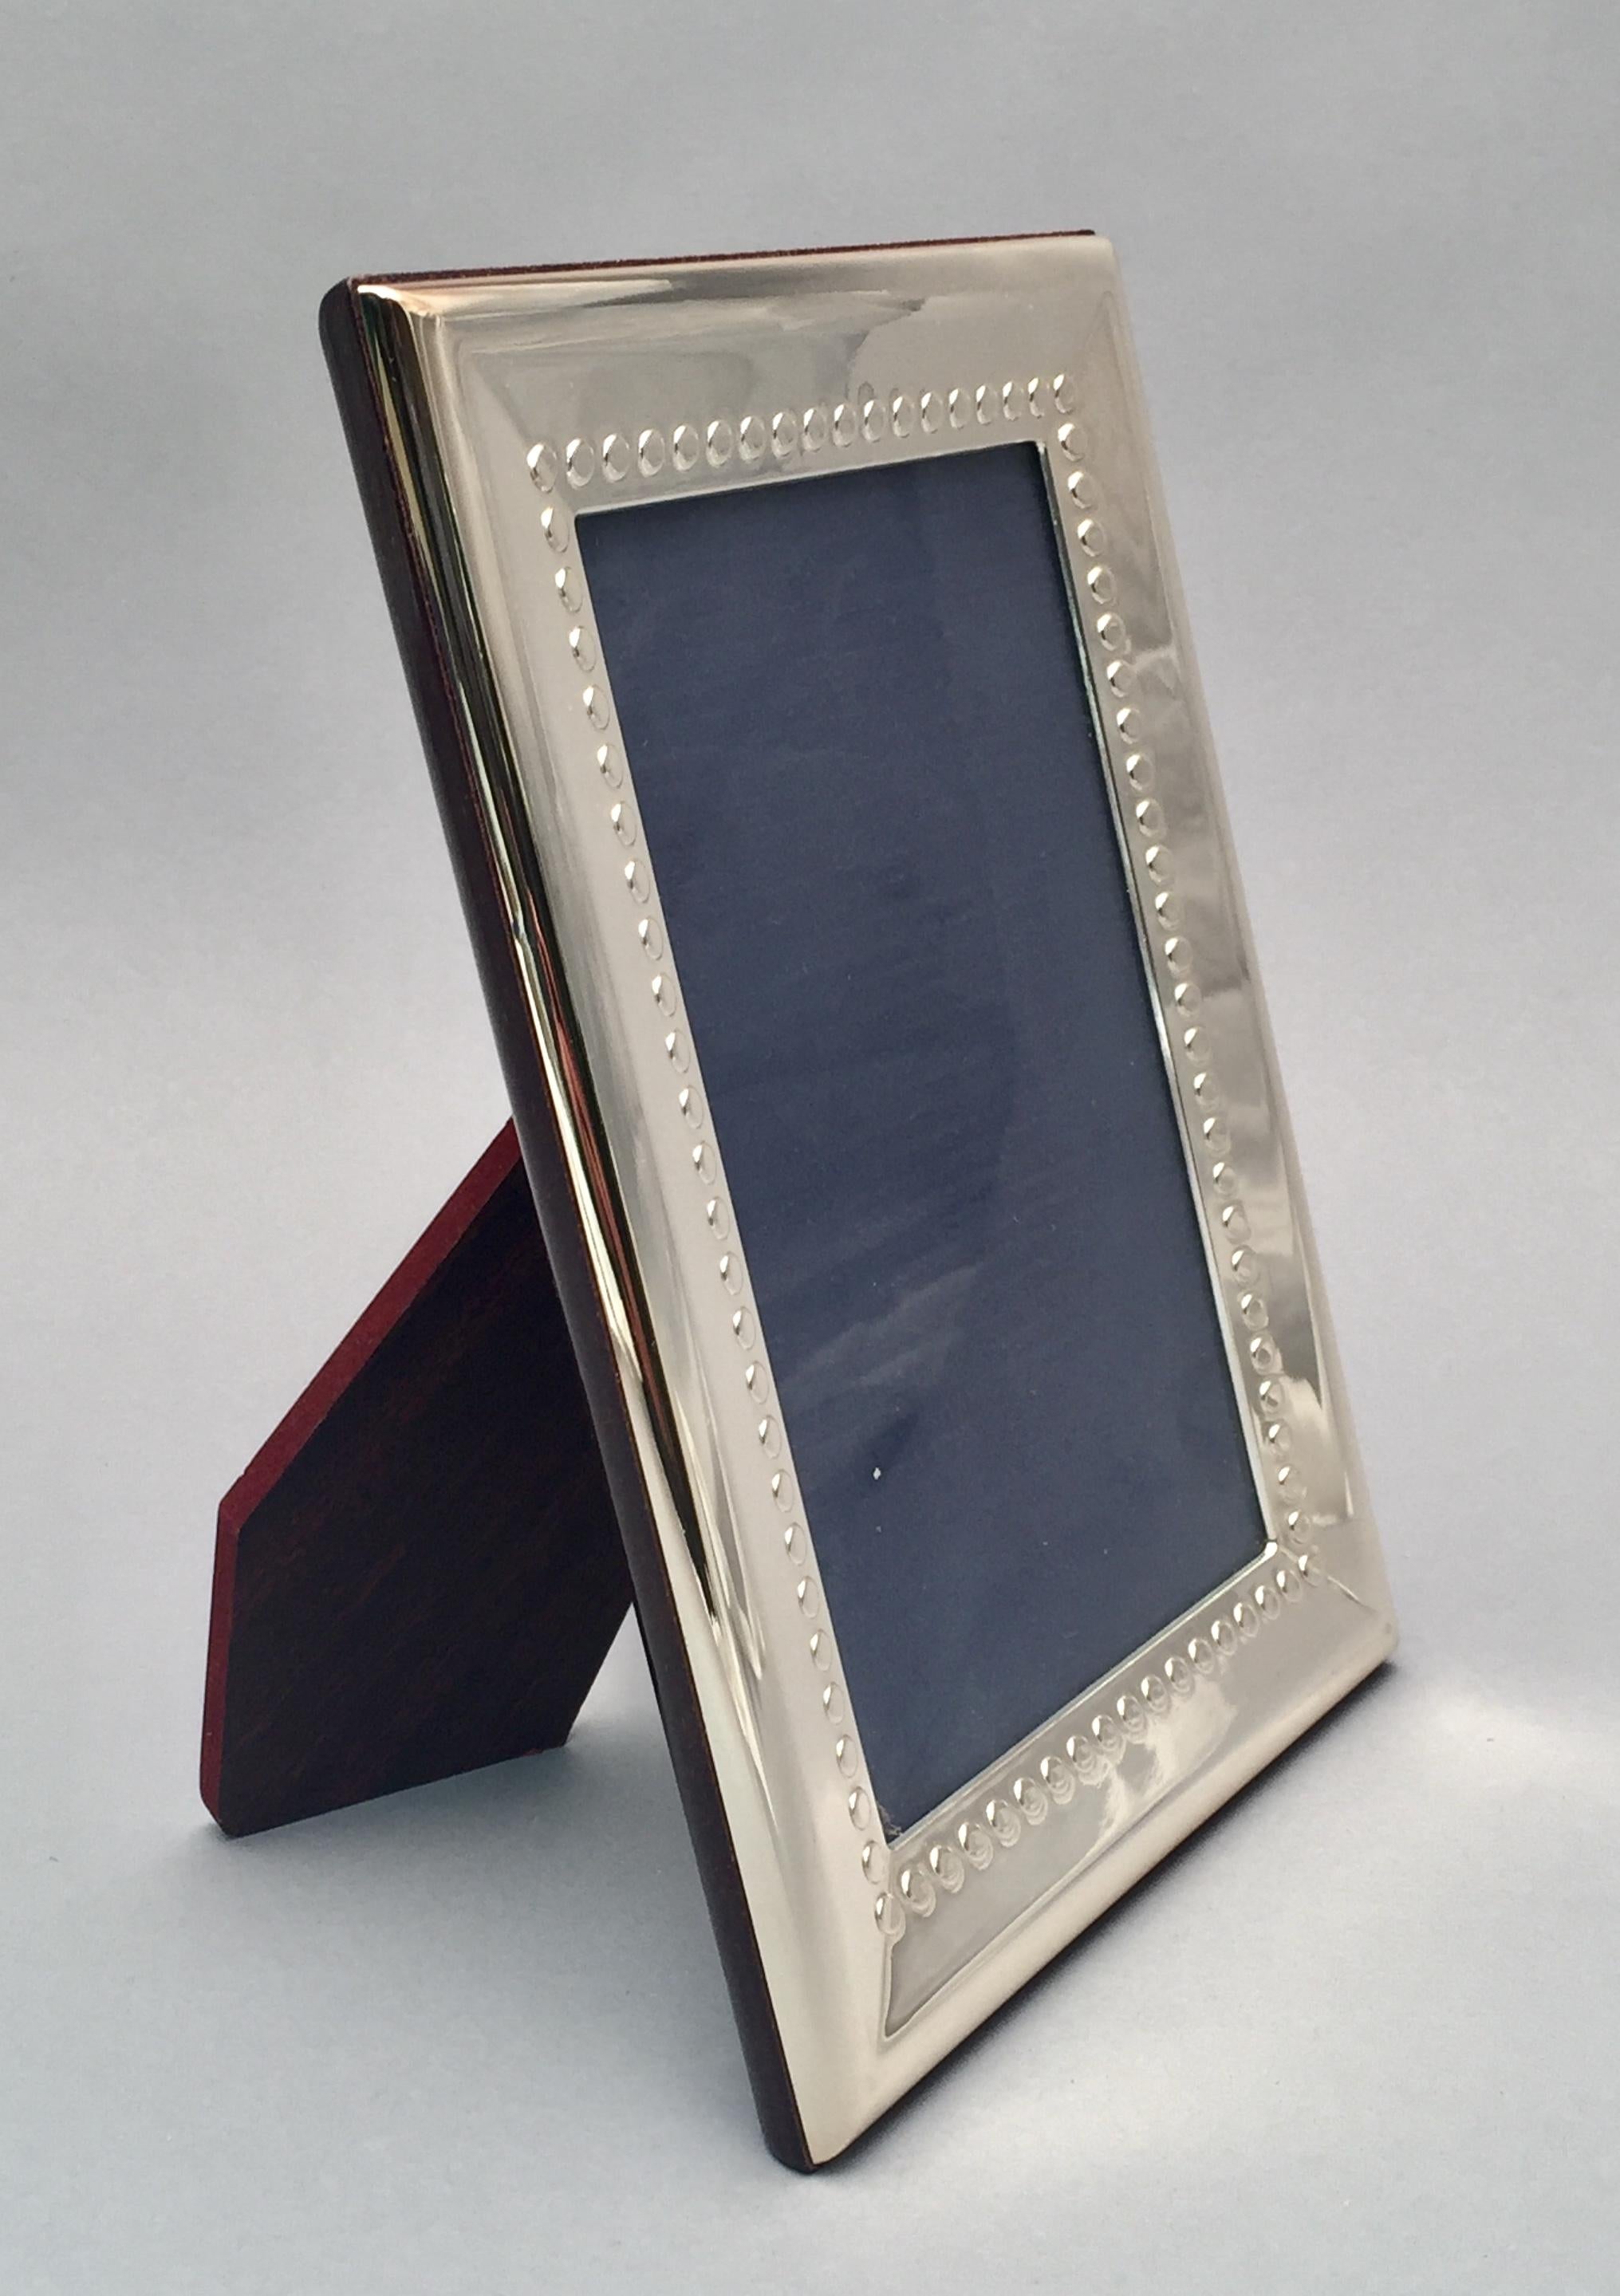 Sterling silver picture frame made in Italy by Del Conte, 5 3/4 x 3 3/4. Designed with a raised polka dot border, glossy wooden back and wooden easel. Can be used as a great frame for wedding pictures, to give as a gift to a friend, or to enhance